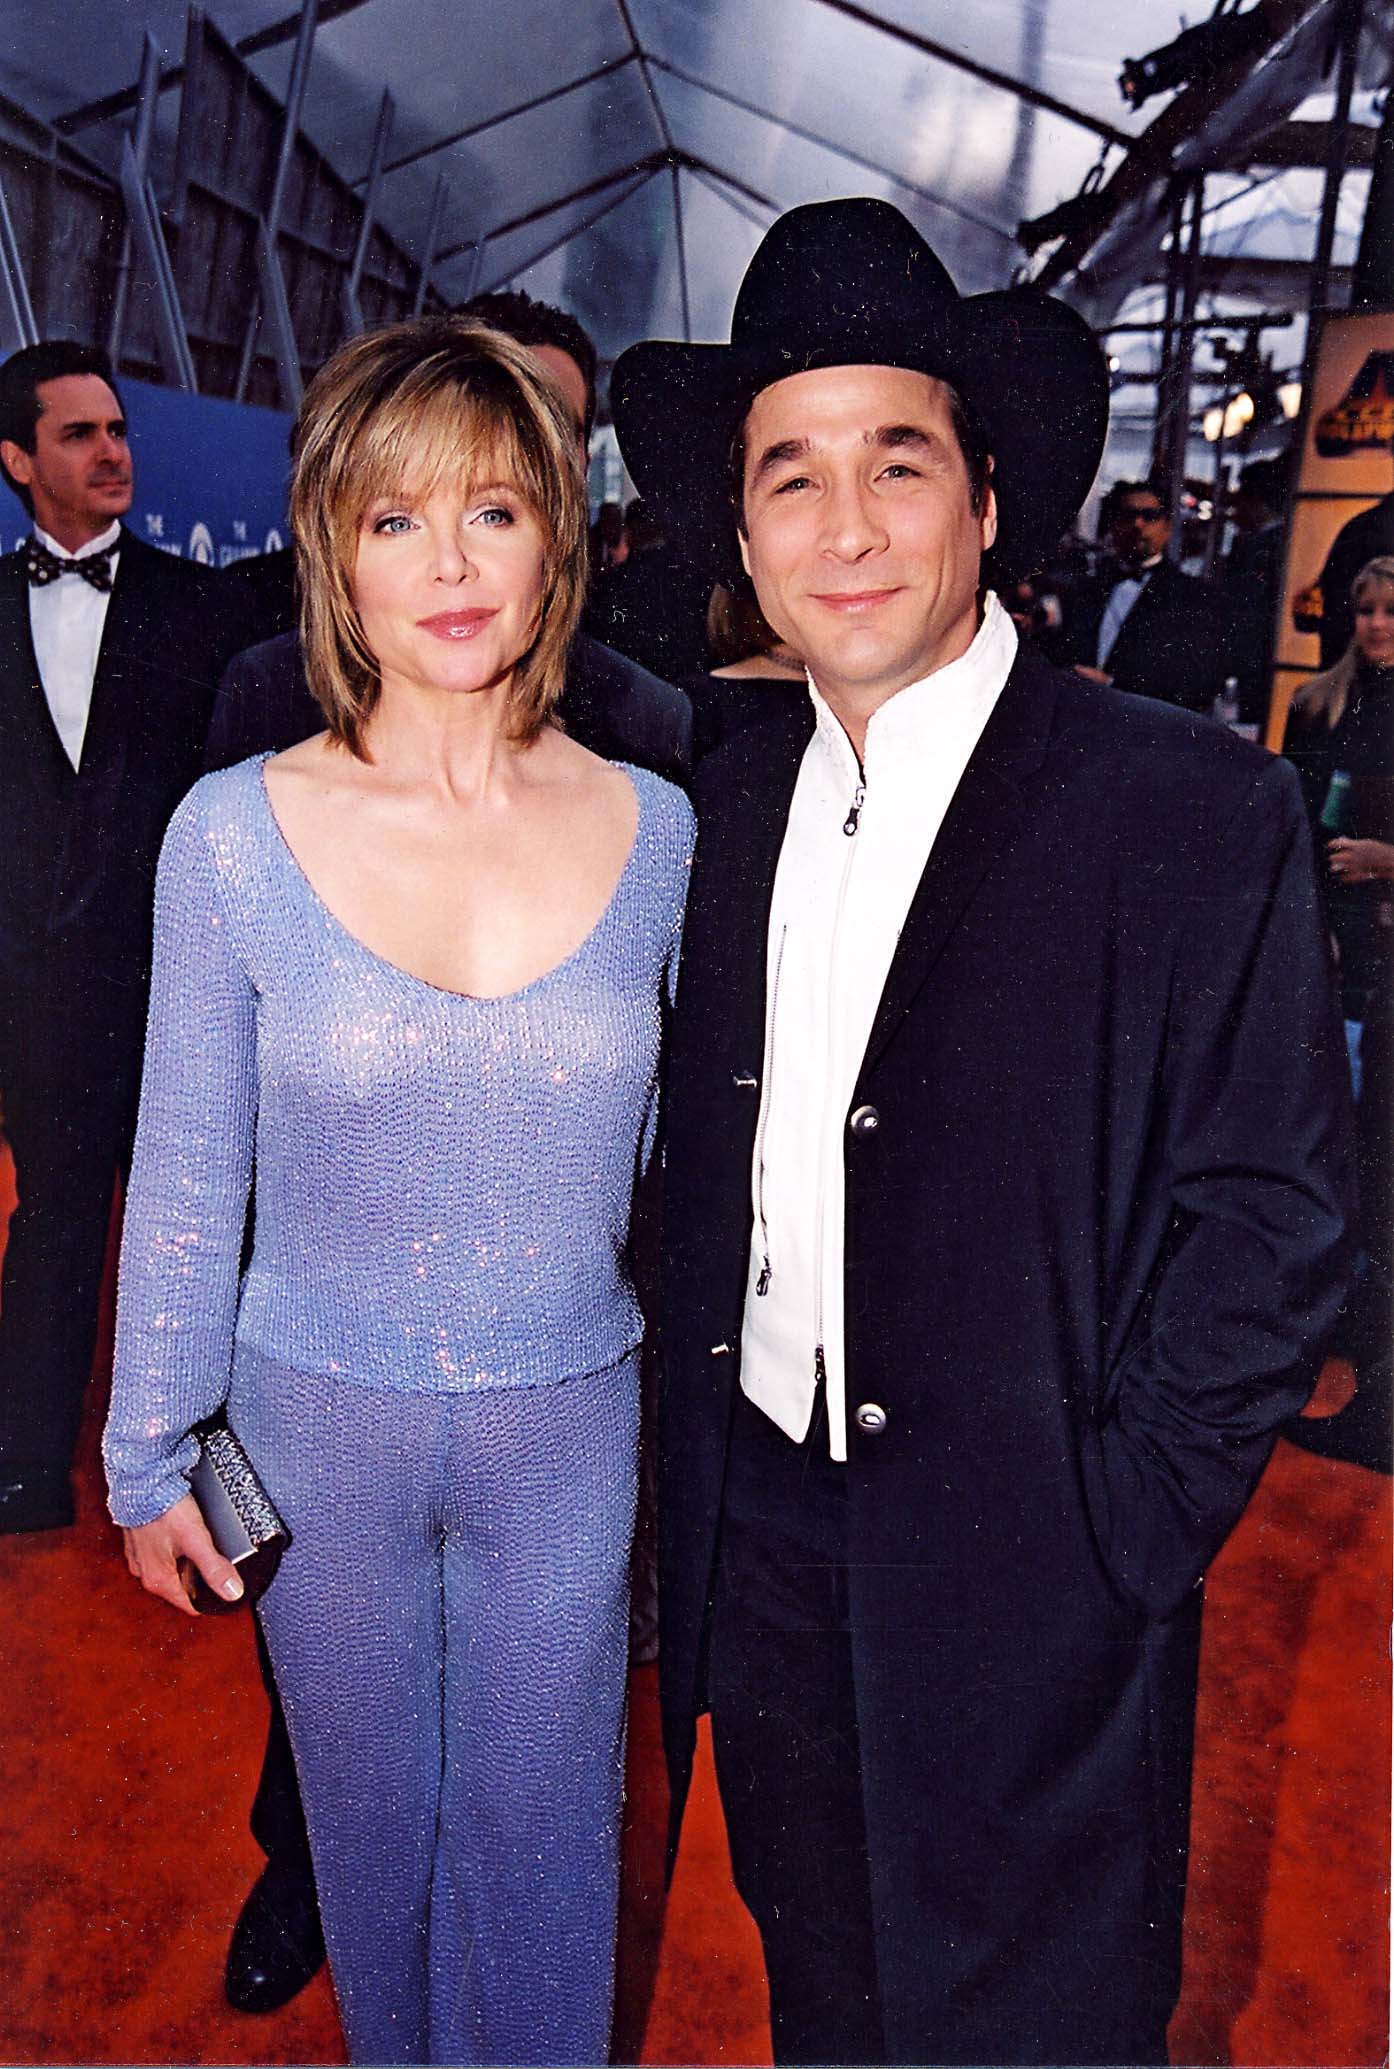 Clint and Lisa Black at the "Albino Alligator" premiere in 1996 | Source: Getty Images